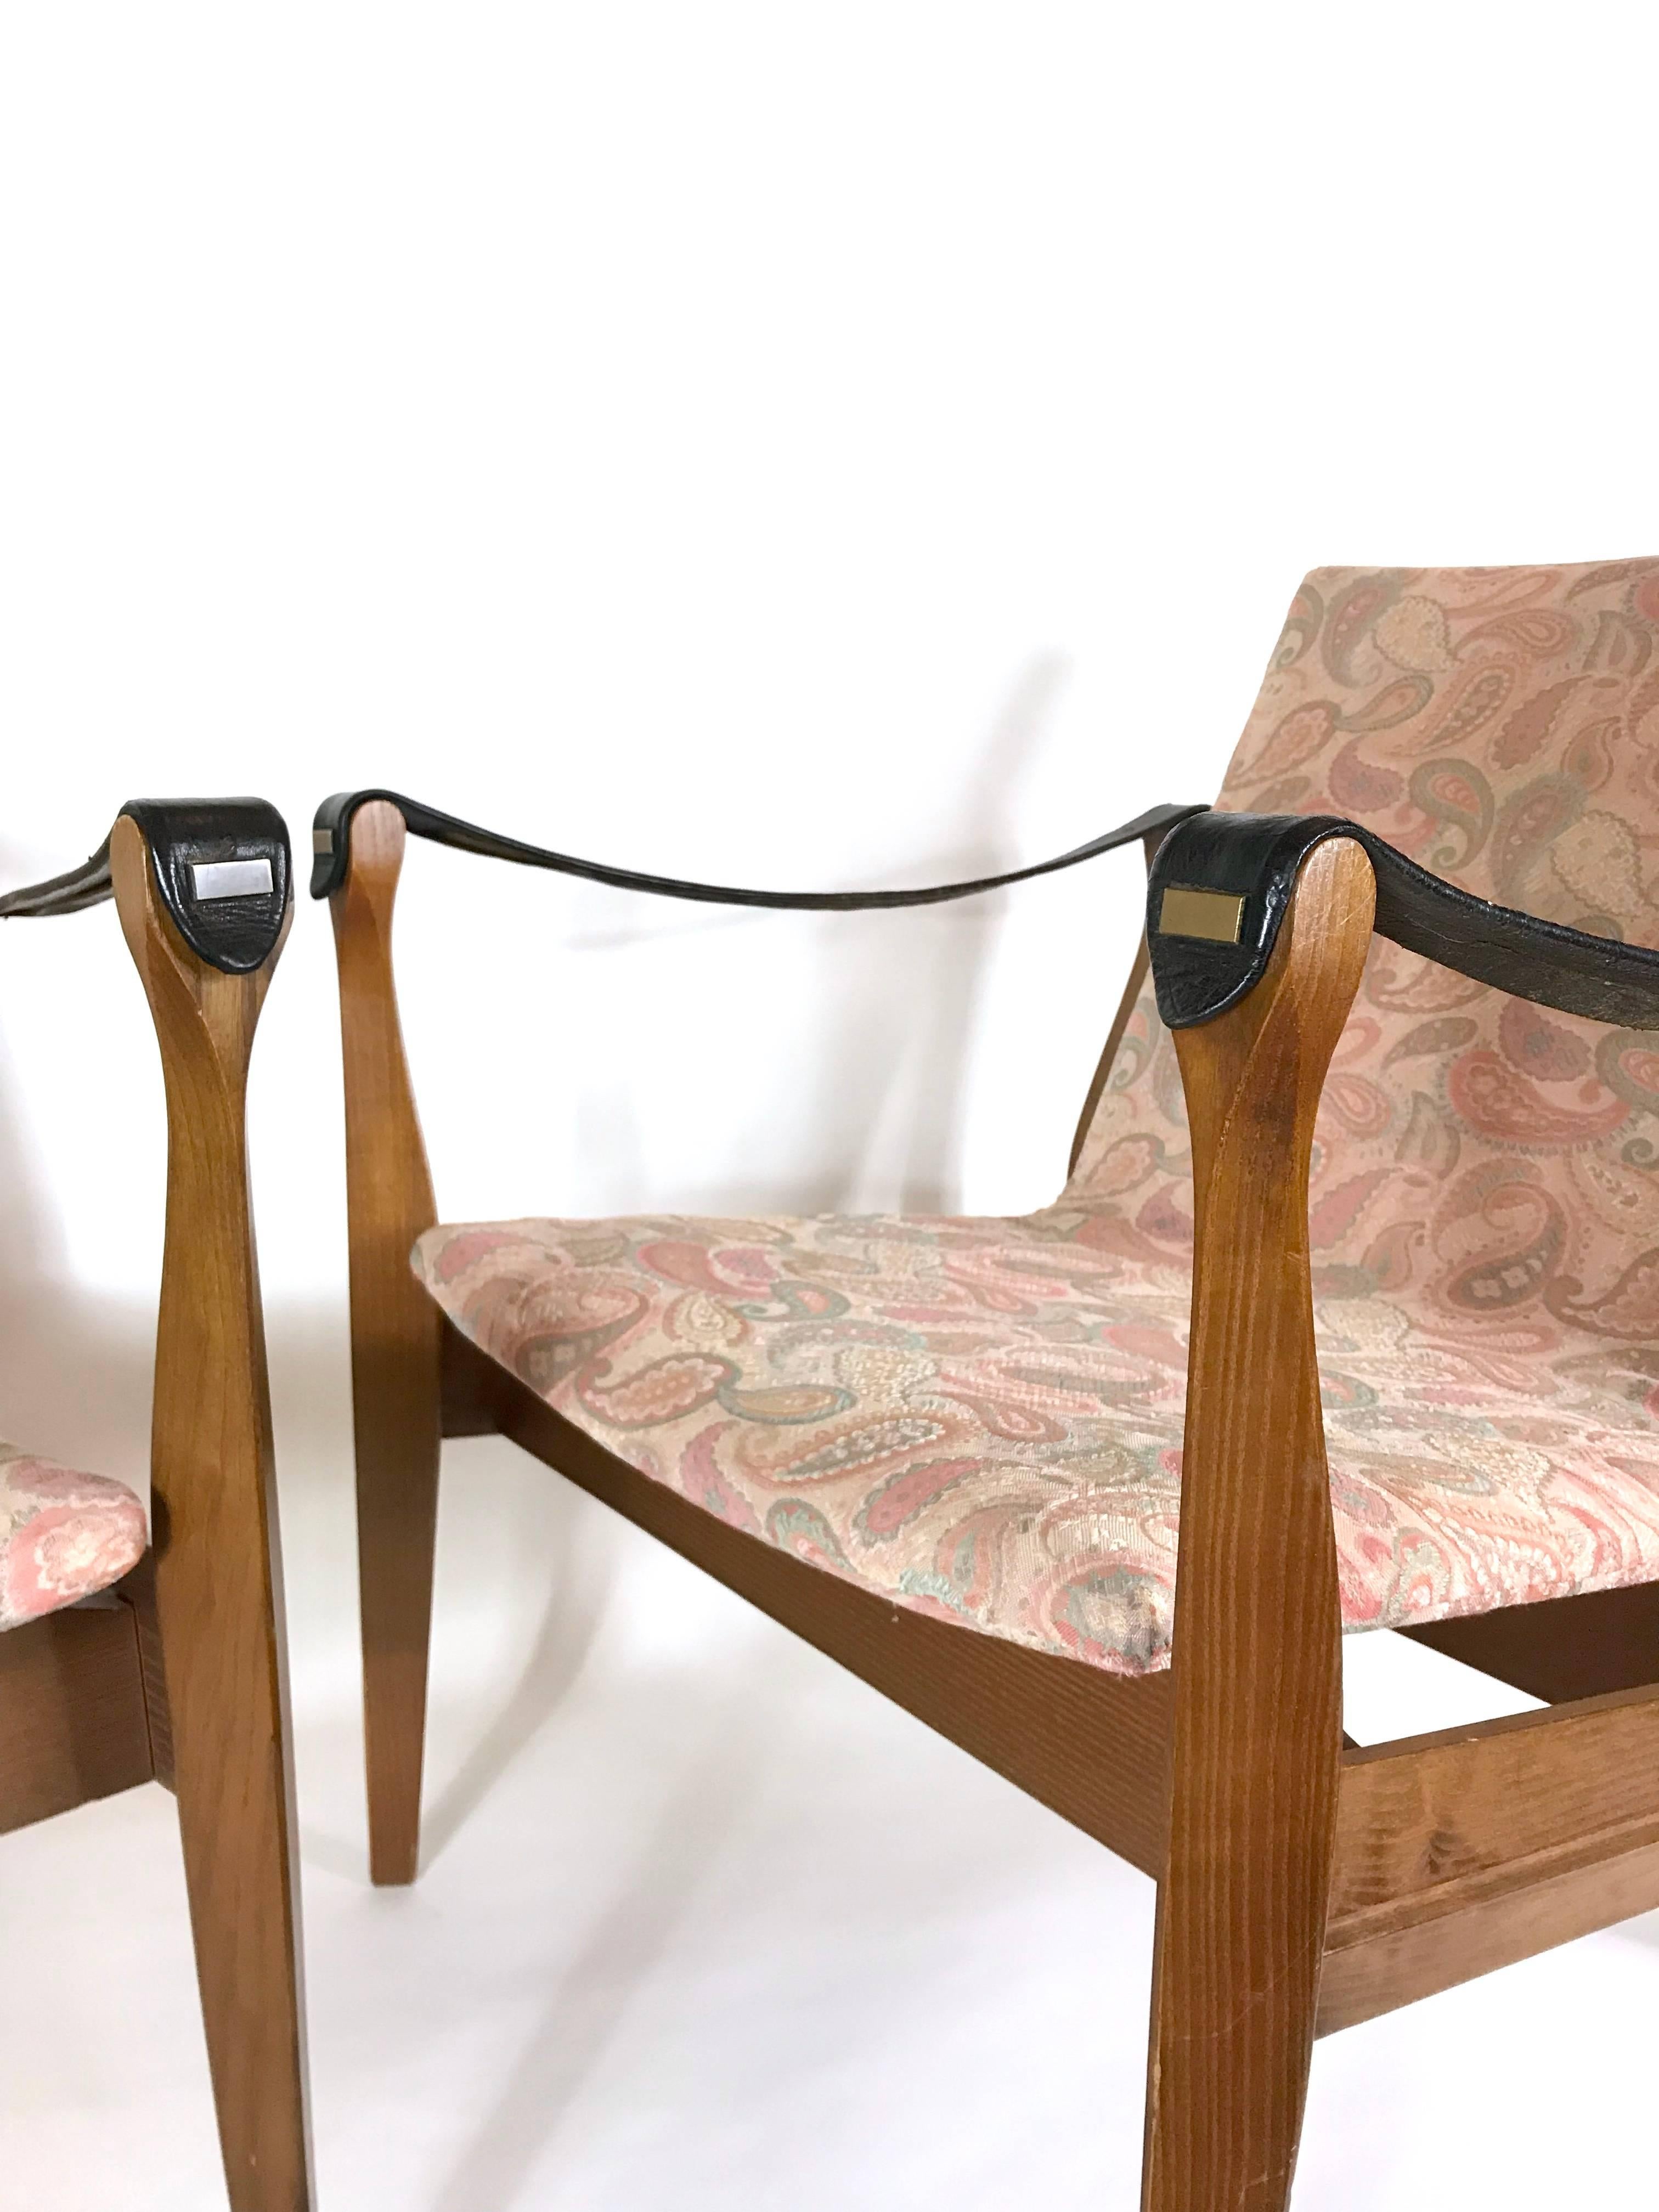 Pair of rare lounge chairs designed by Karen & Ebbe Clemmensen (Safaristol, Safari stool) for Fritz Hansen / 1958, Denmark. The frame of the armchairs are made of ashwood, seats covered with fabric and arm straps made of leather. Signed with